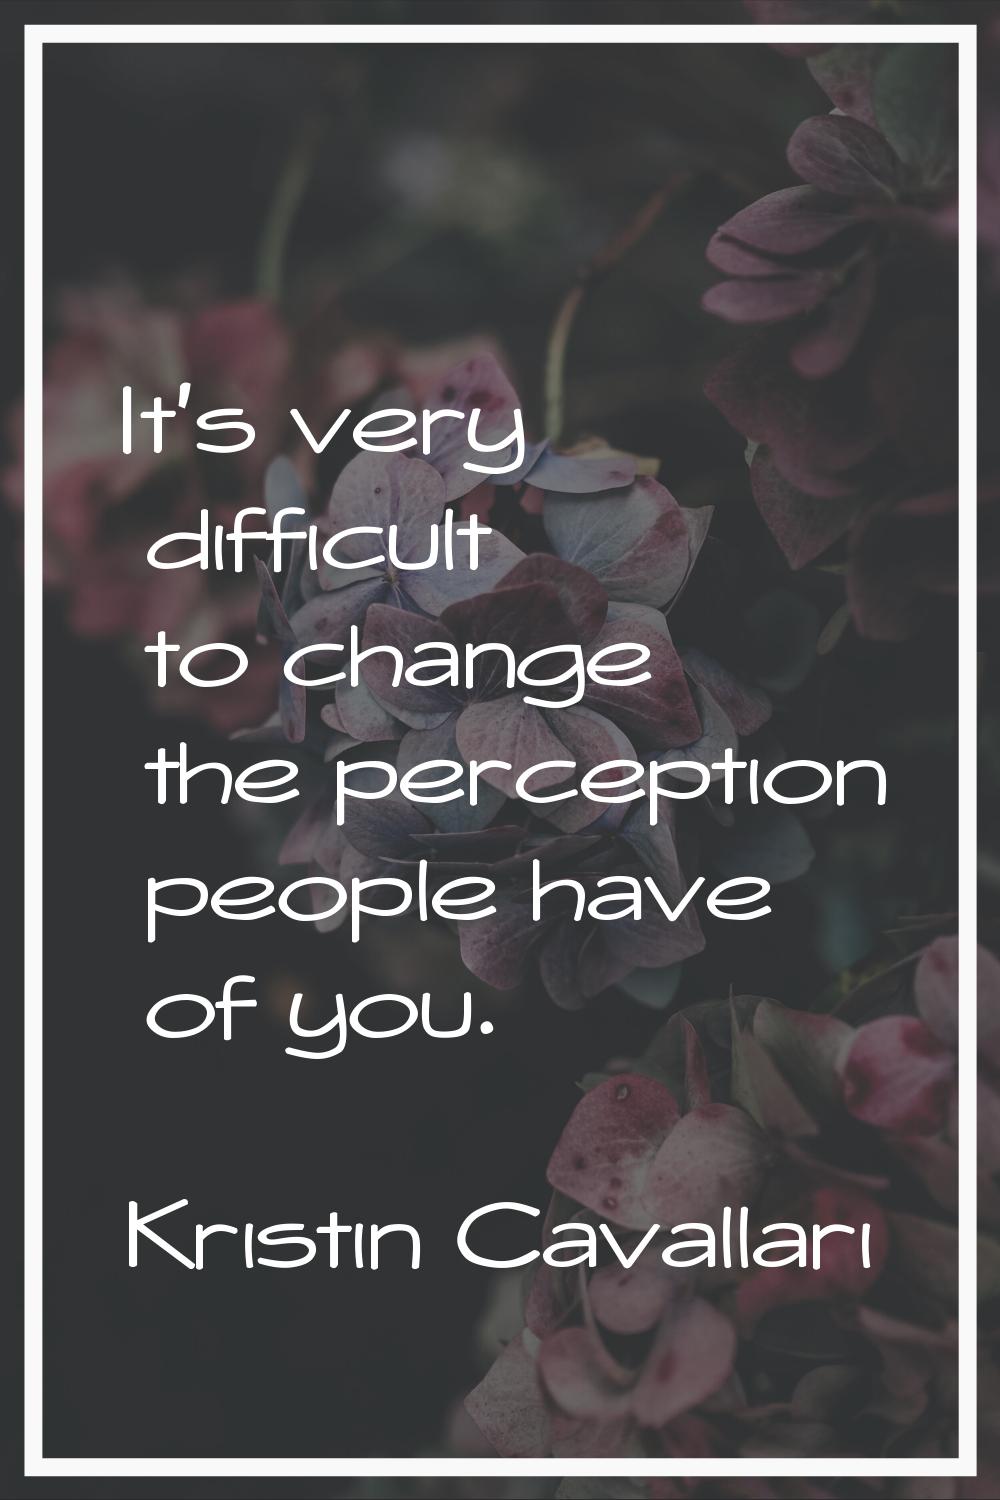 It's very difficult to change the perception people have of you.